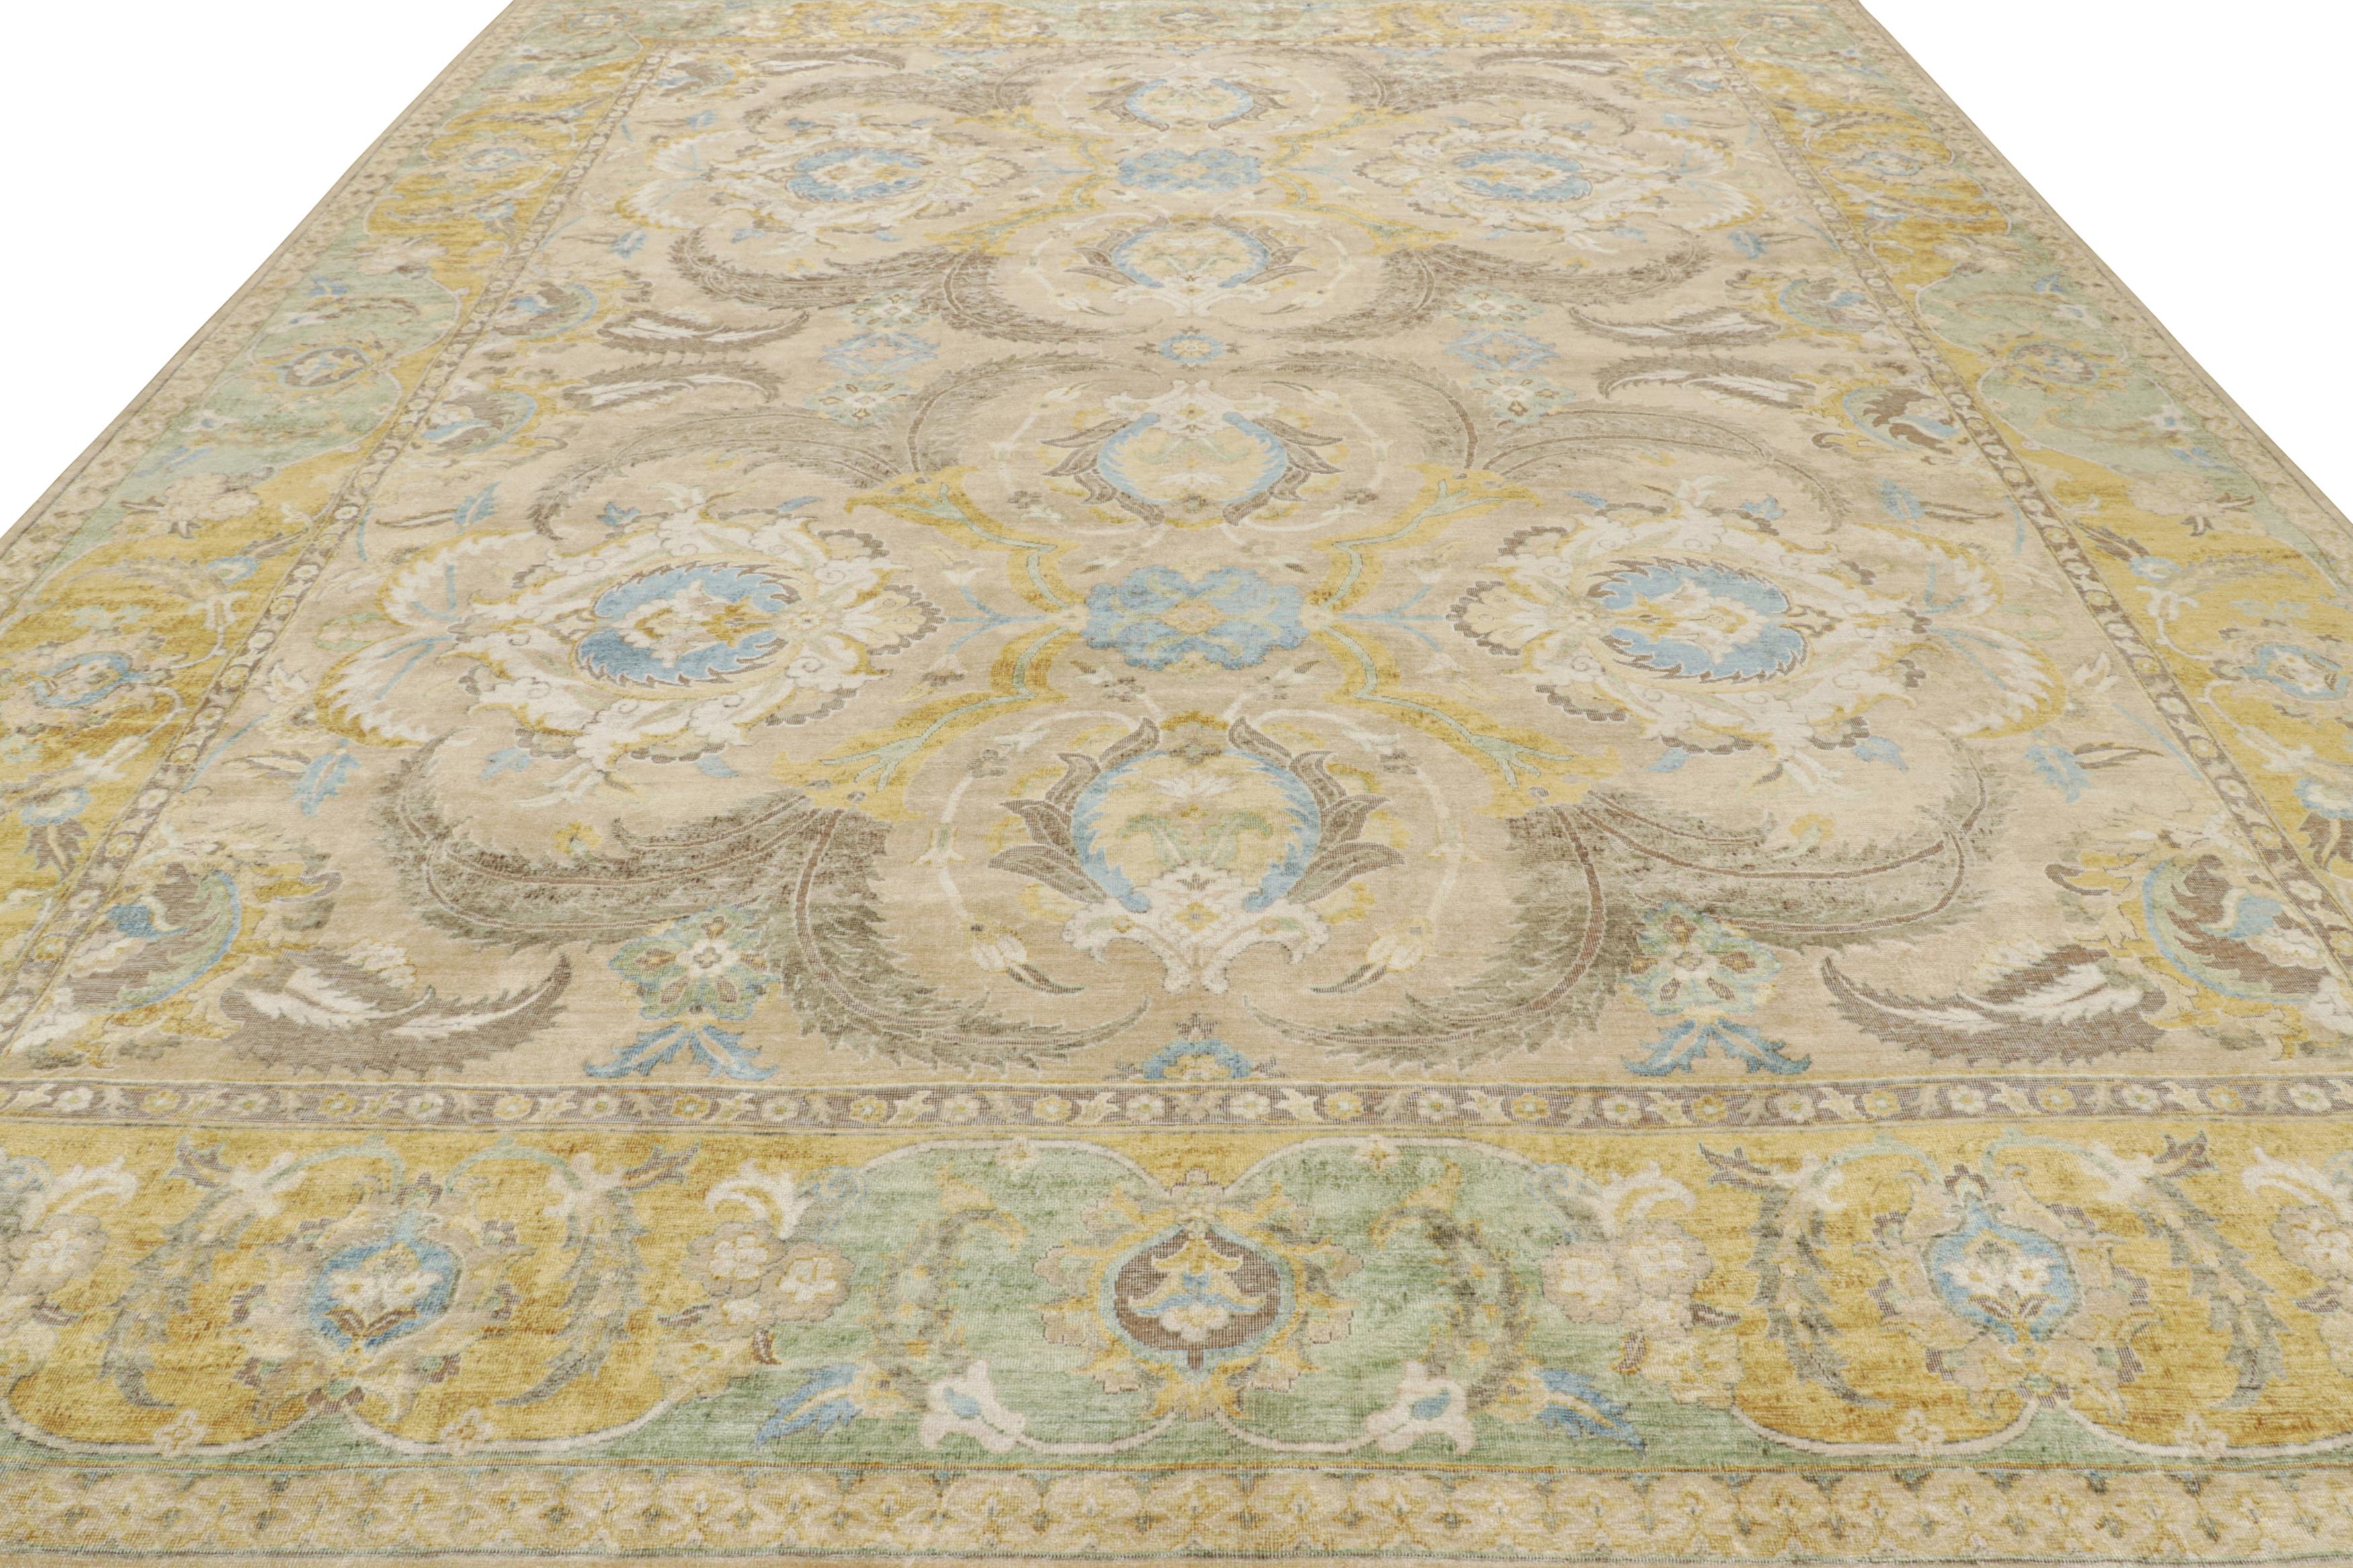 Hand-Knotted Rug & Kilim’s Polonaise Style rug in Beige with Gold and Blue Floral Patterns For Sale